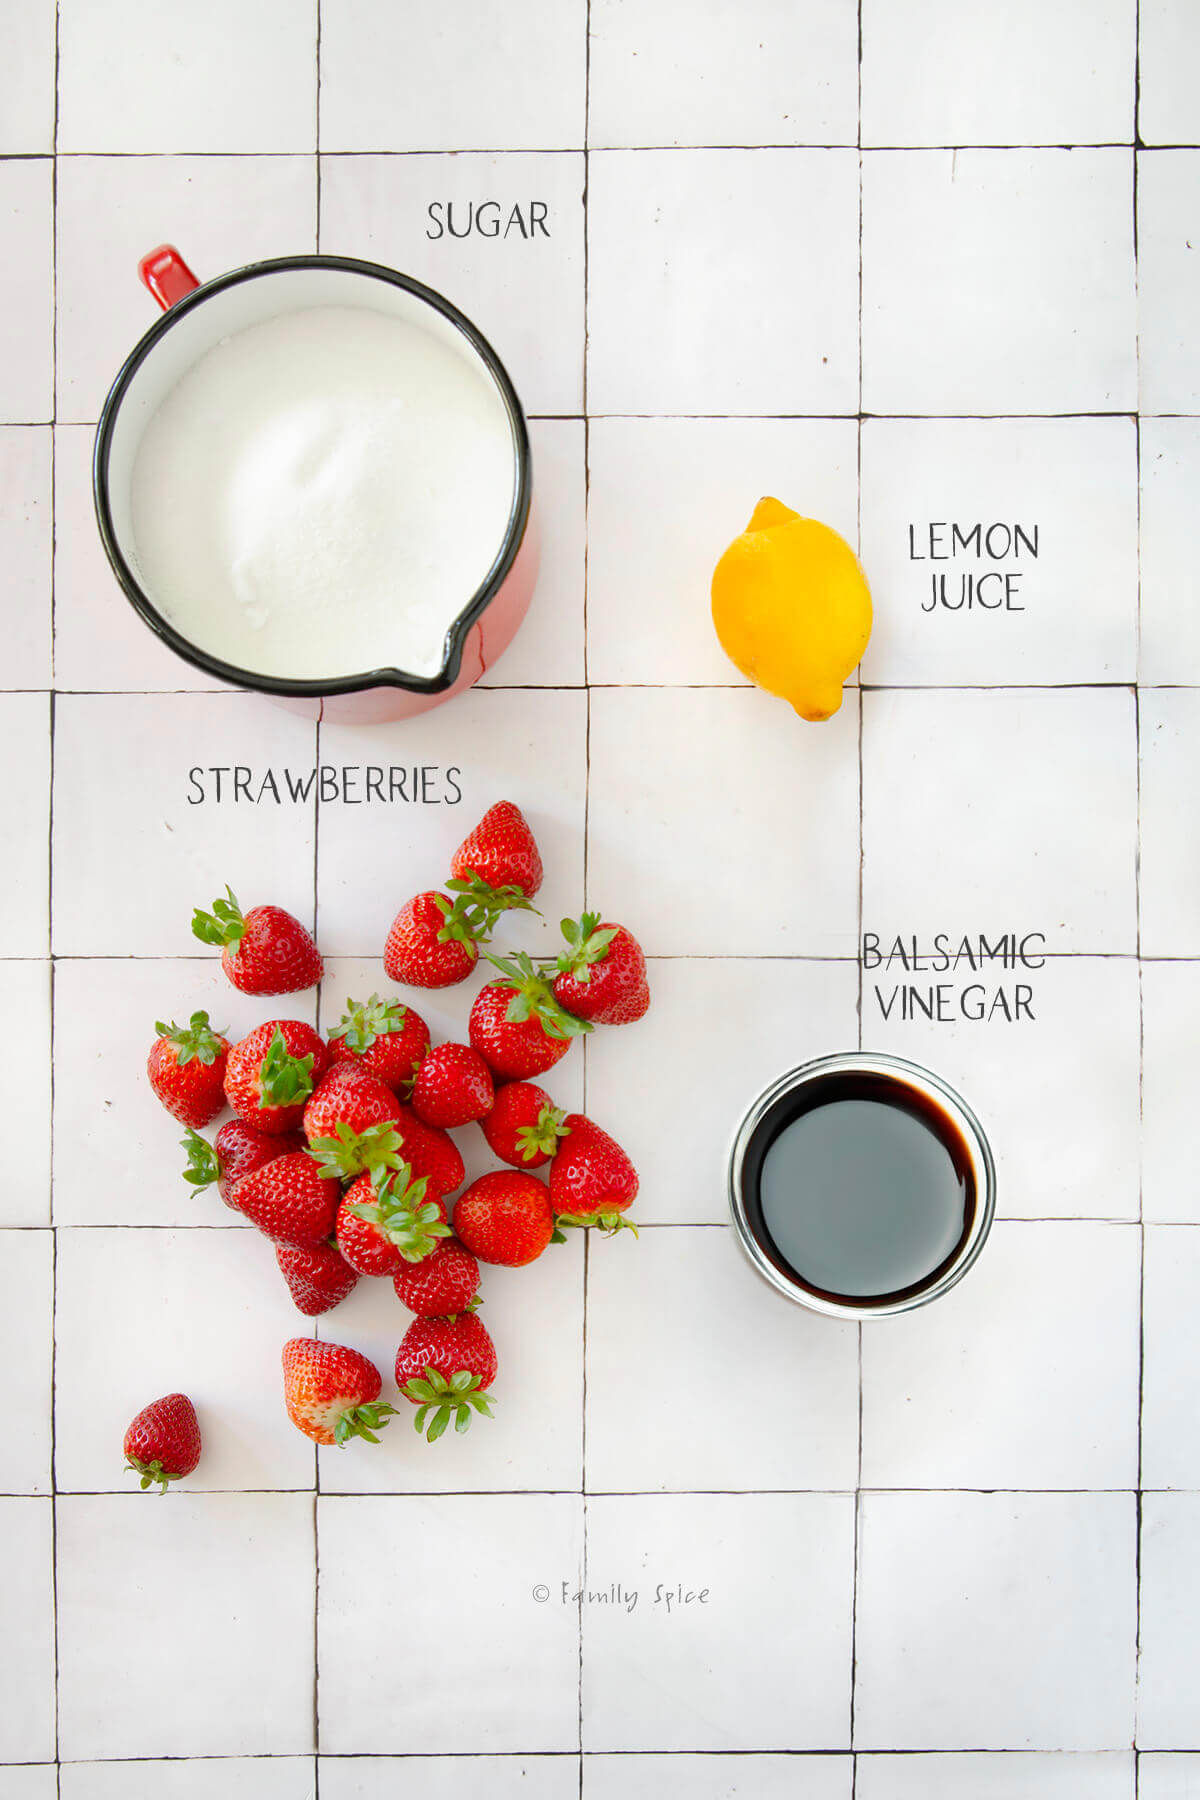 ingredients labeled and needed to make strawberry jam with balsamic vinegar